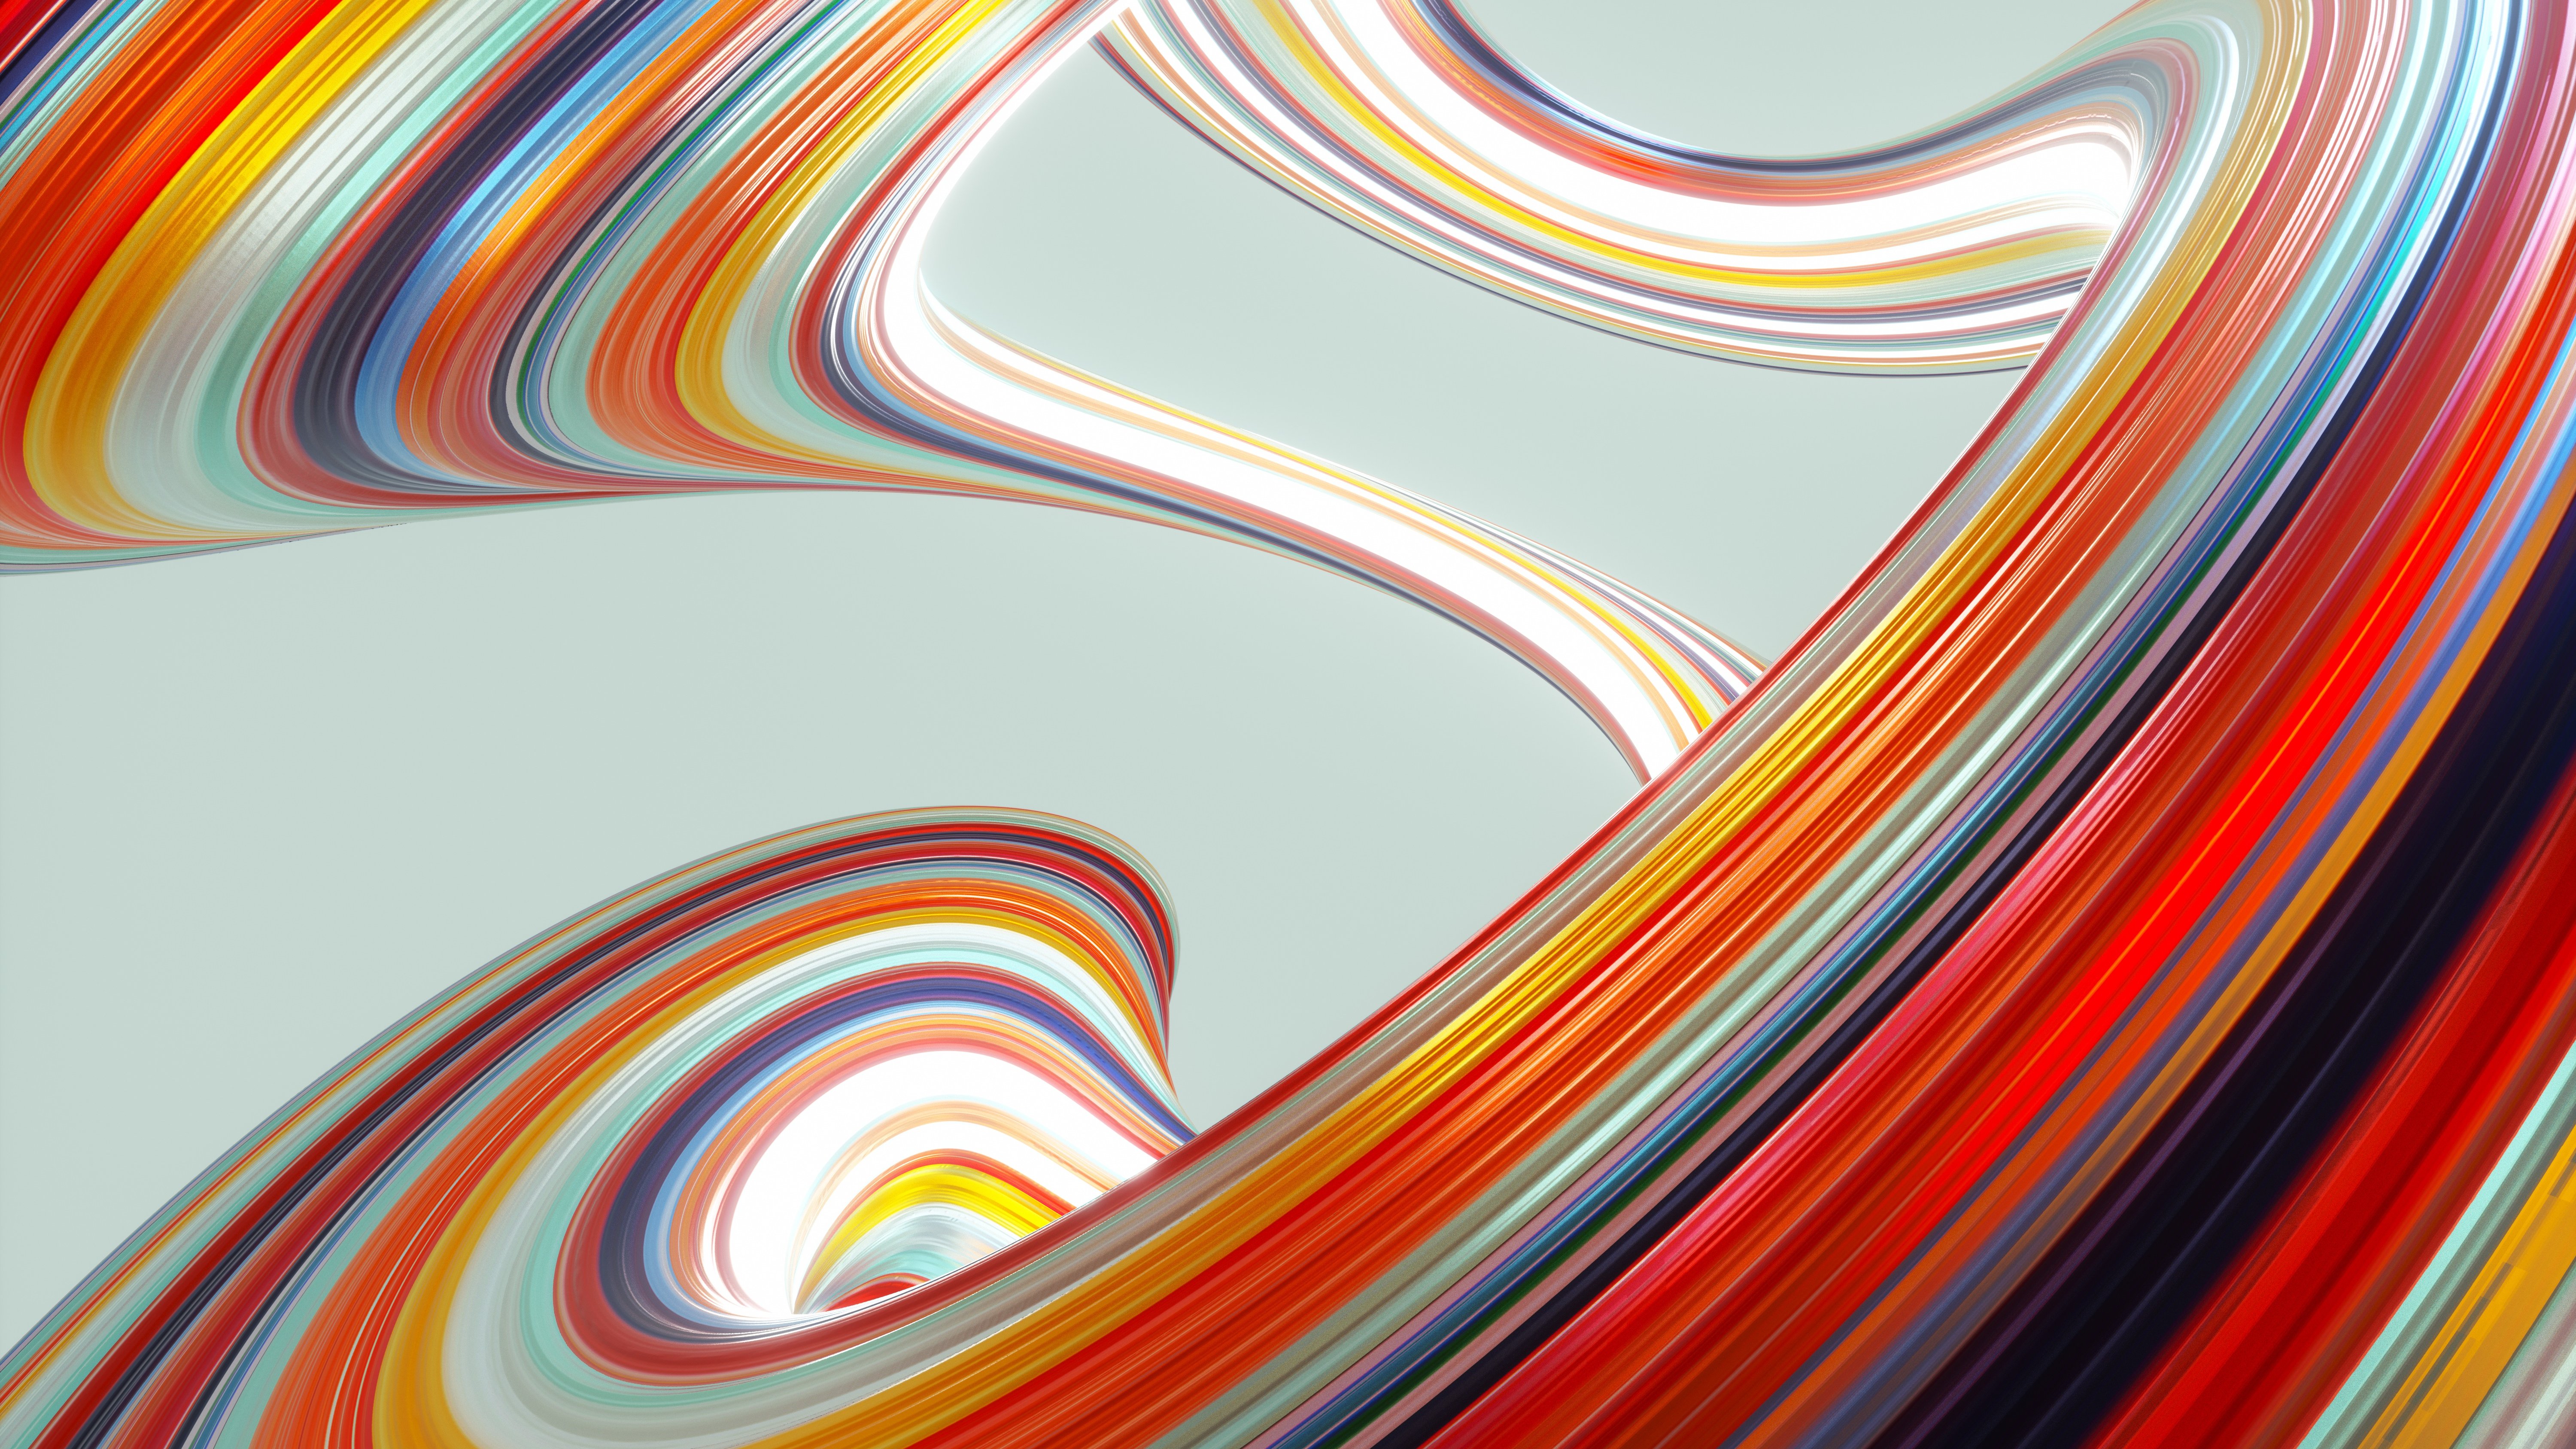 Digital generated image of multi coloured curved shape with striped pattern against grey background.